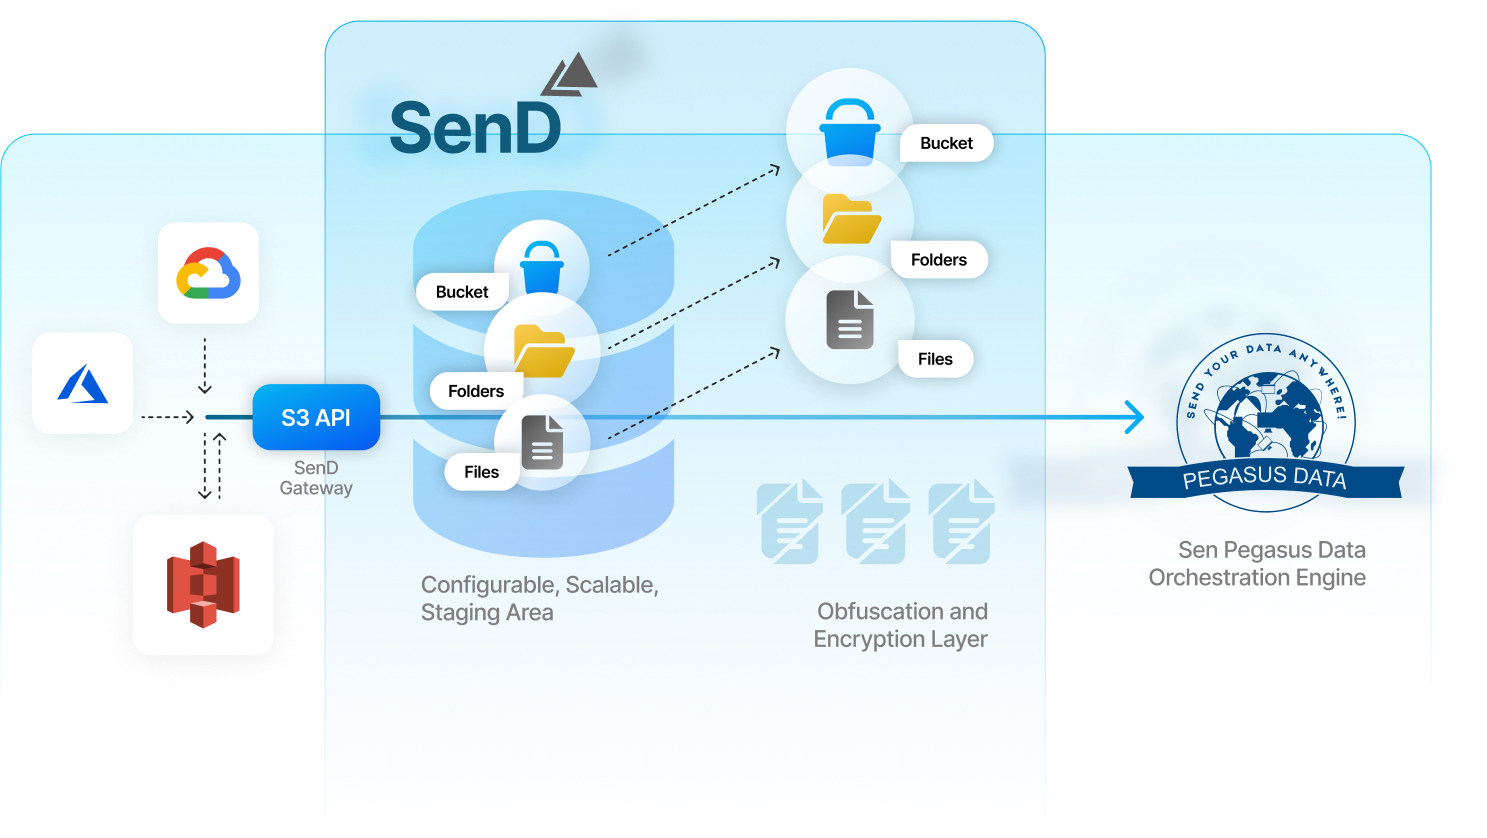 How Send Works